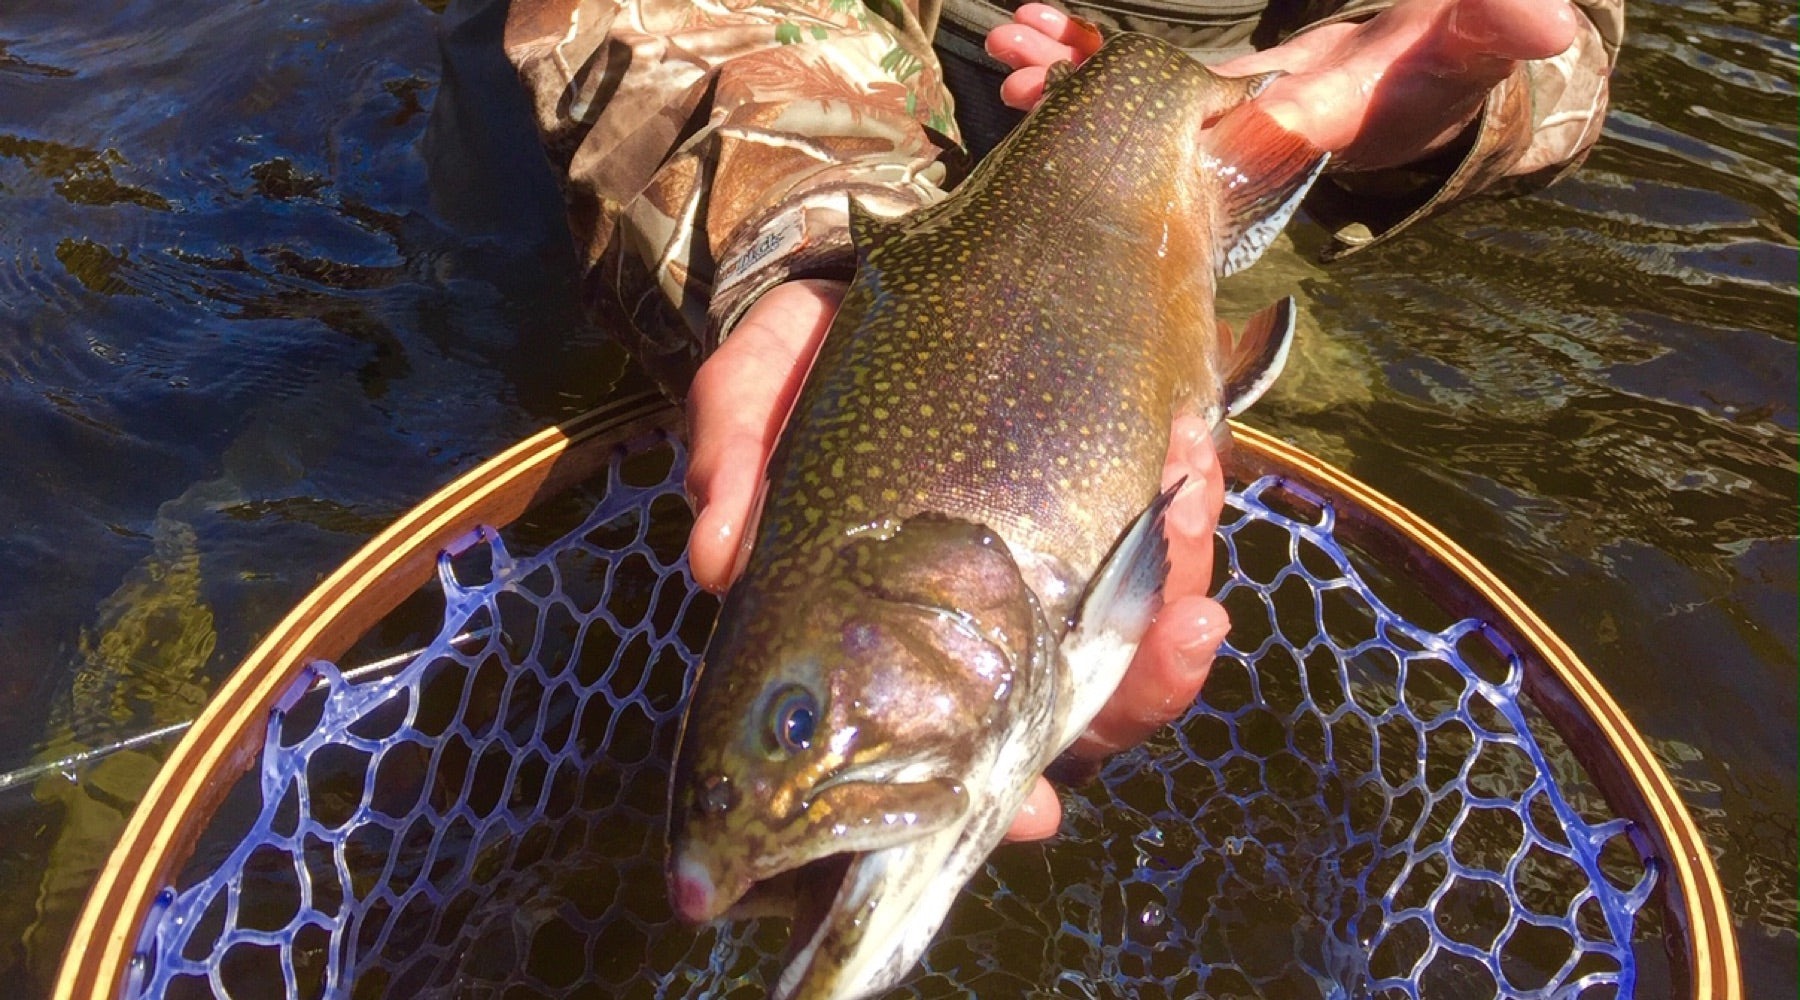 Local Fishing Report: The Mill, Mianus, and Saugatuck Rivers